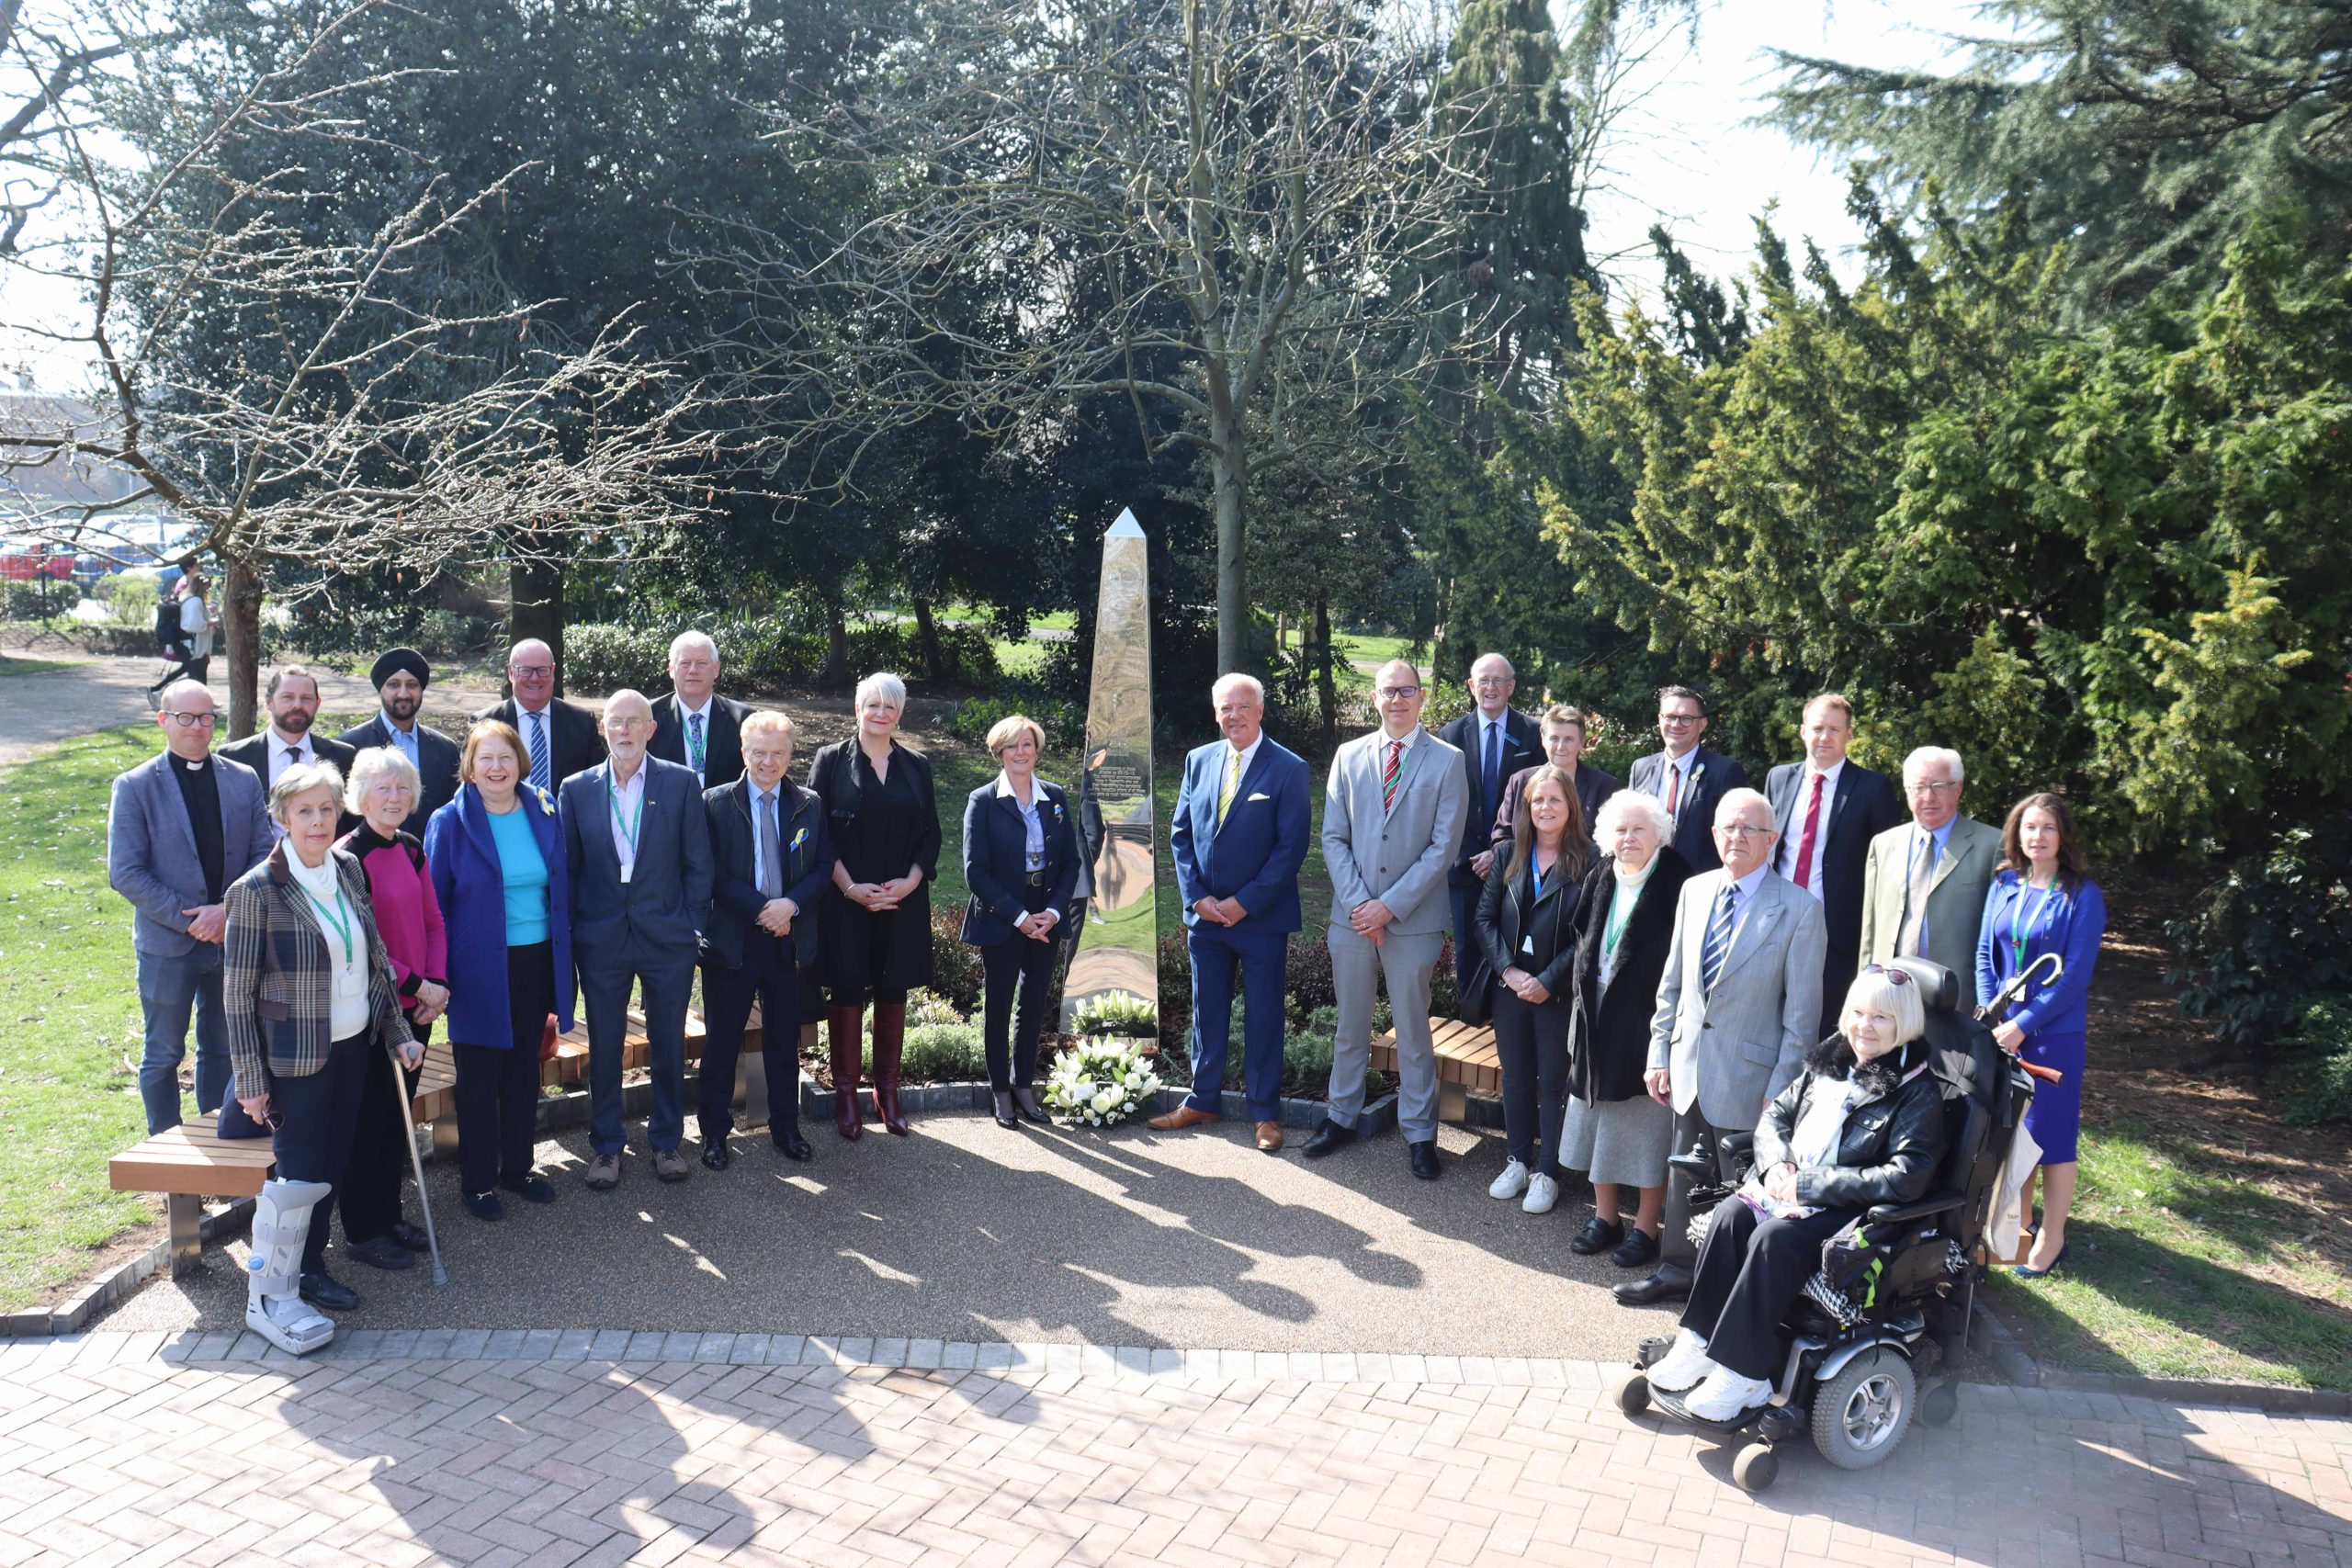 Councillors and dignitaries met in Bridgford Park to view the unveiling of the steel COVID 19 Memorial scaled